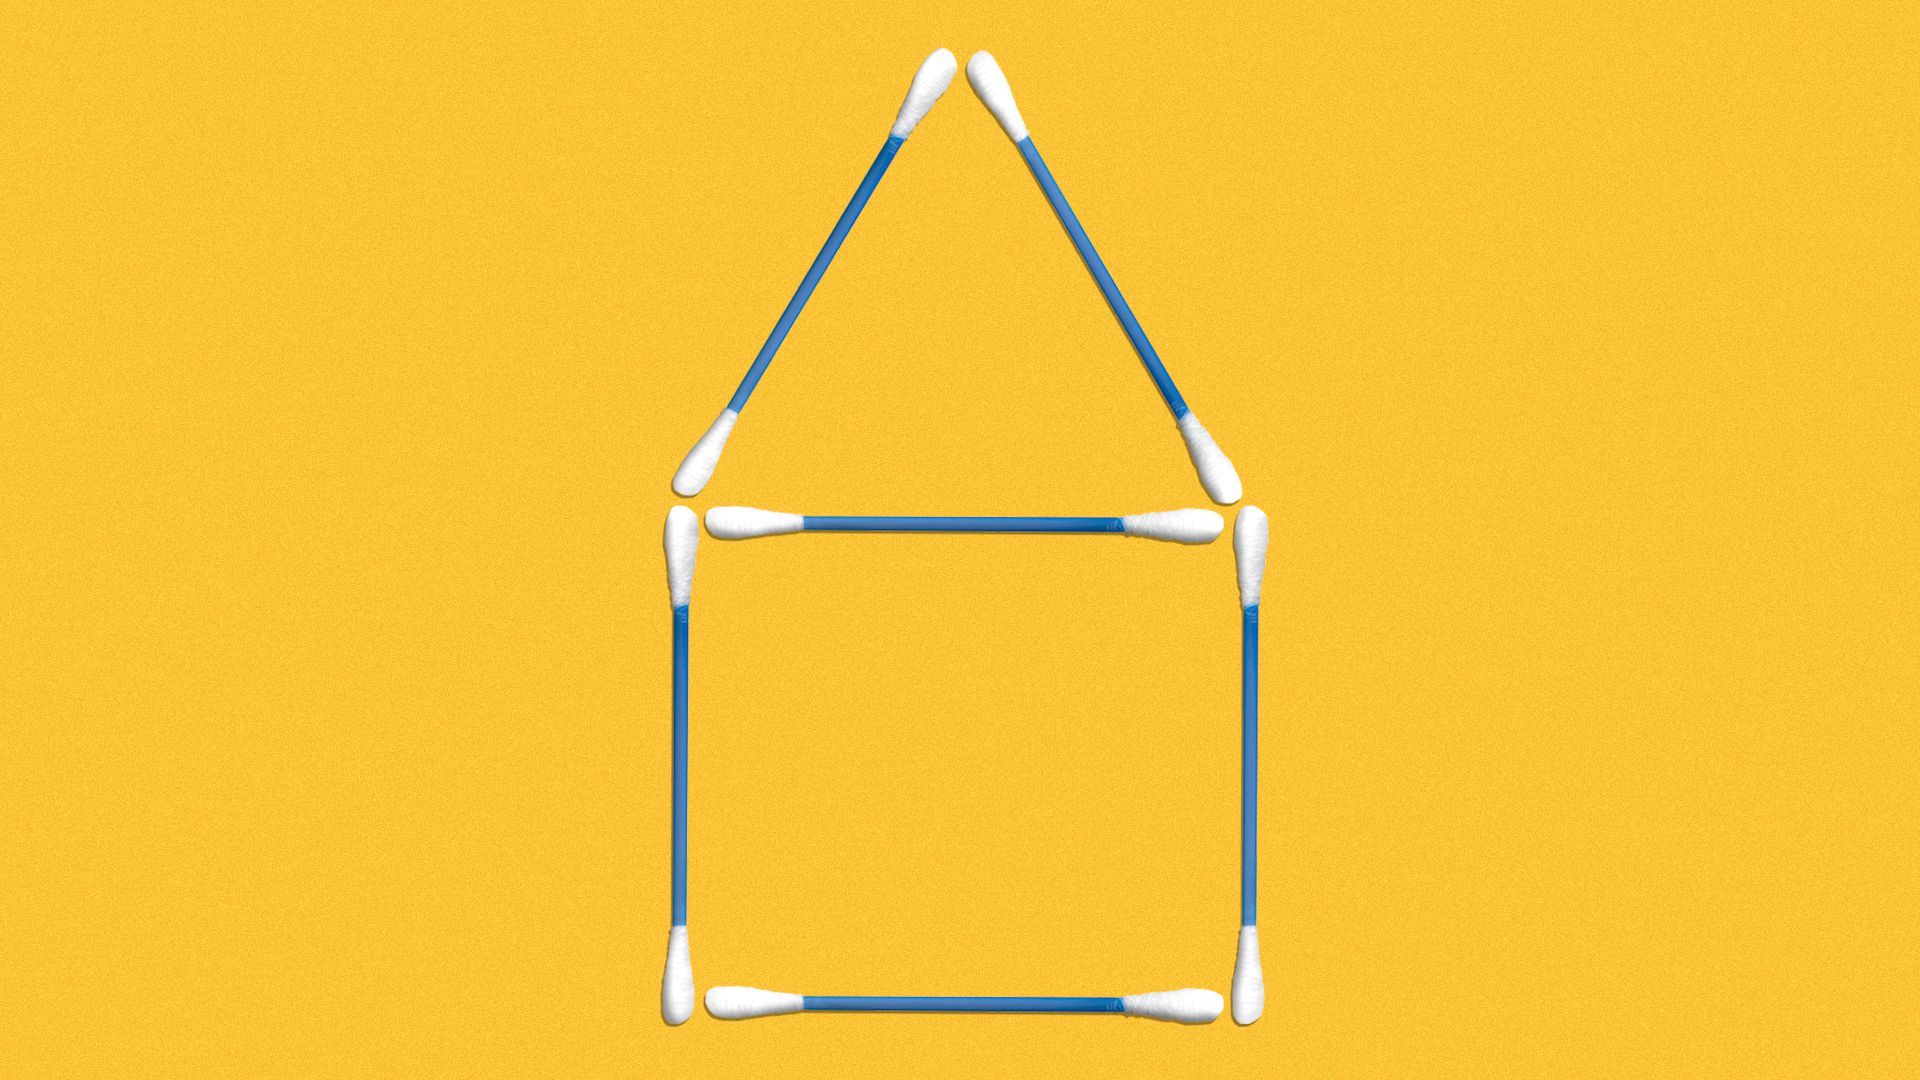 Illustration of a house made out of cotton swabs.